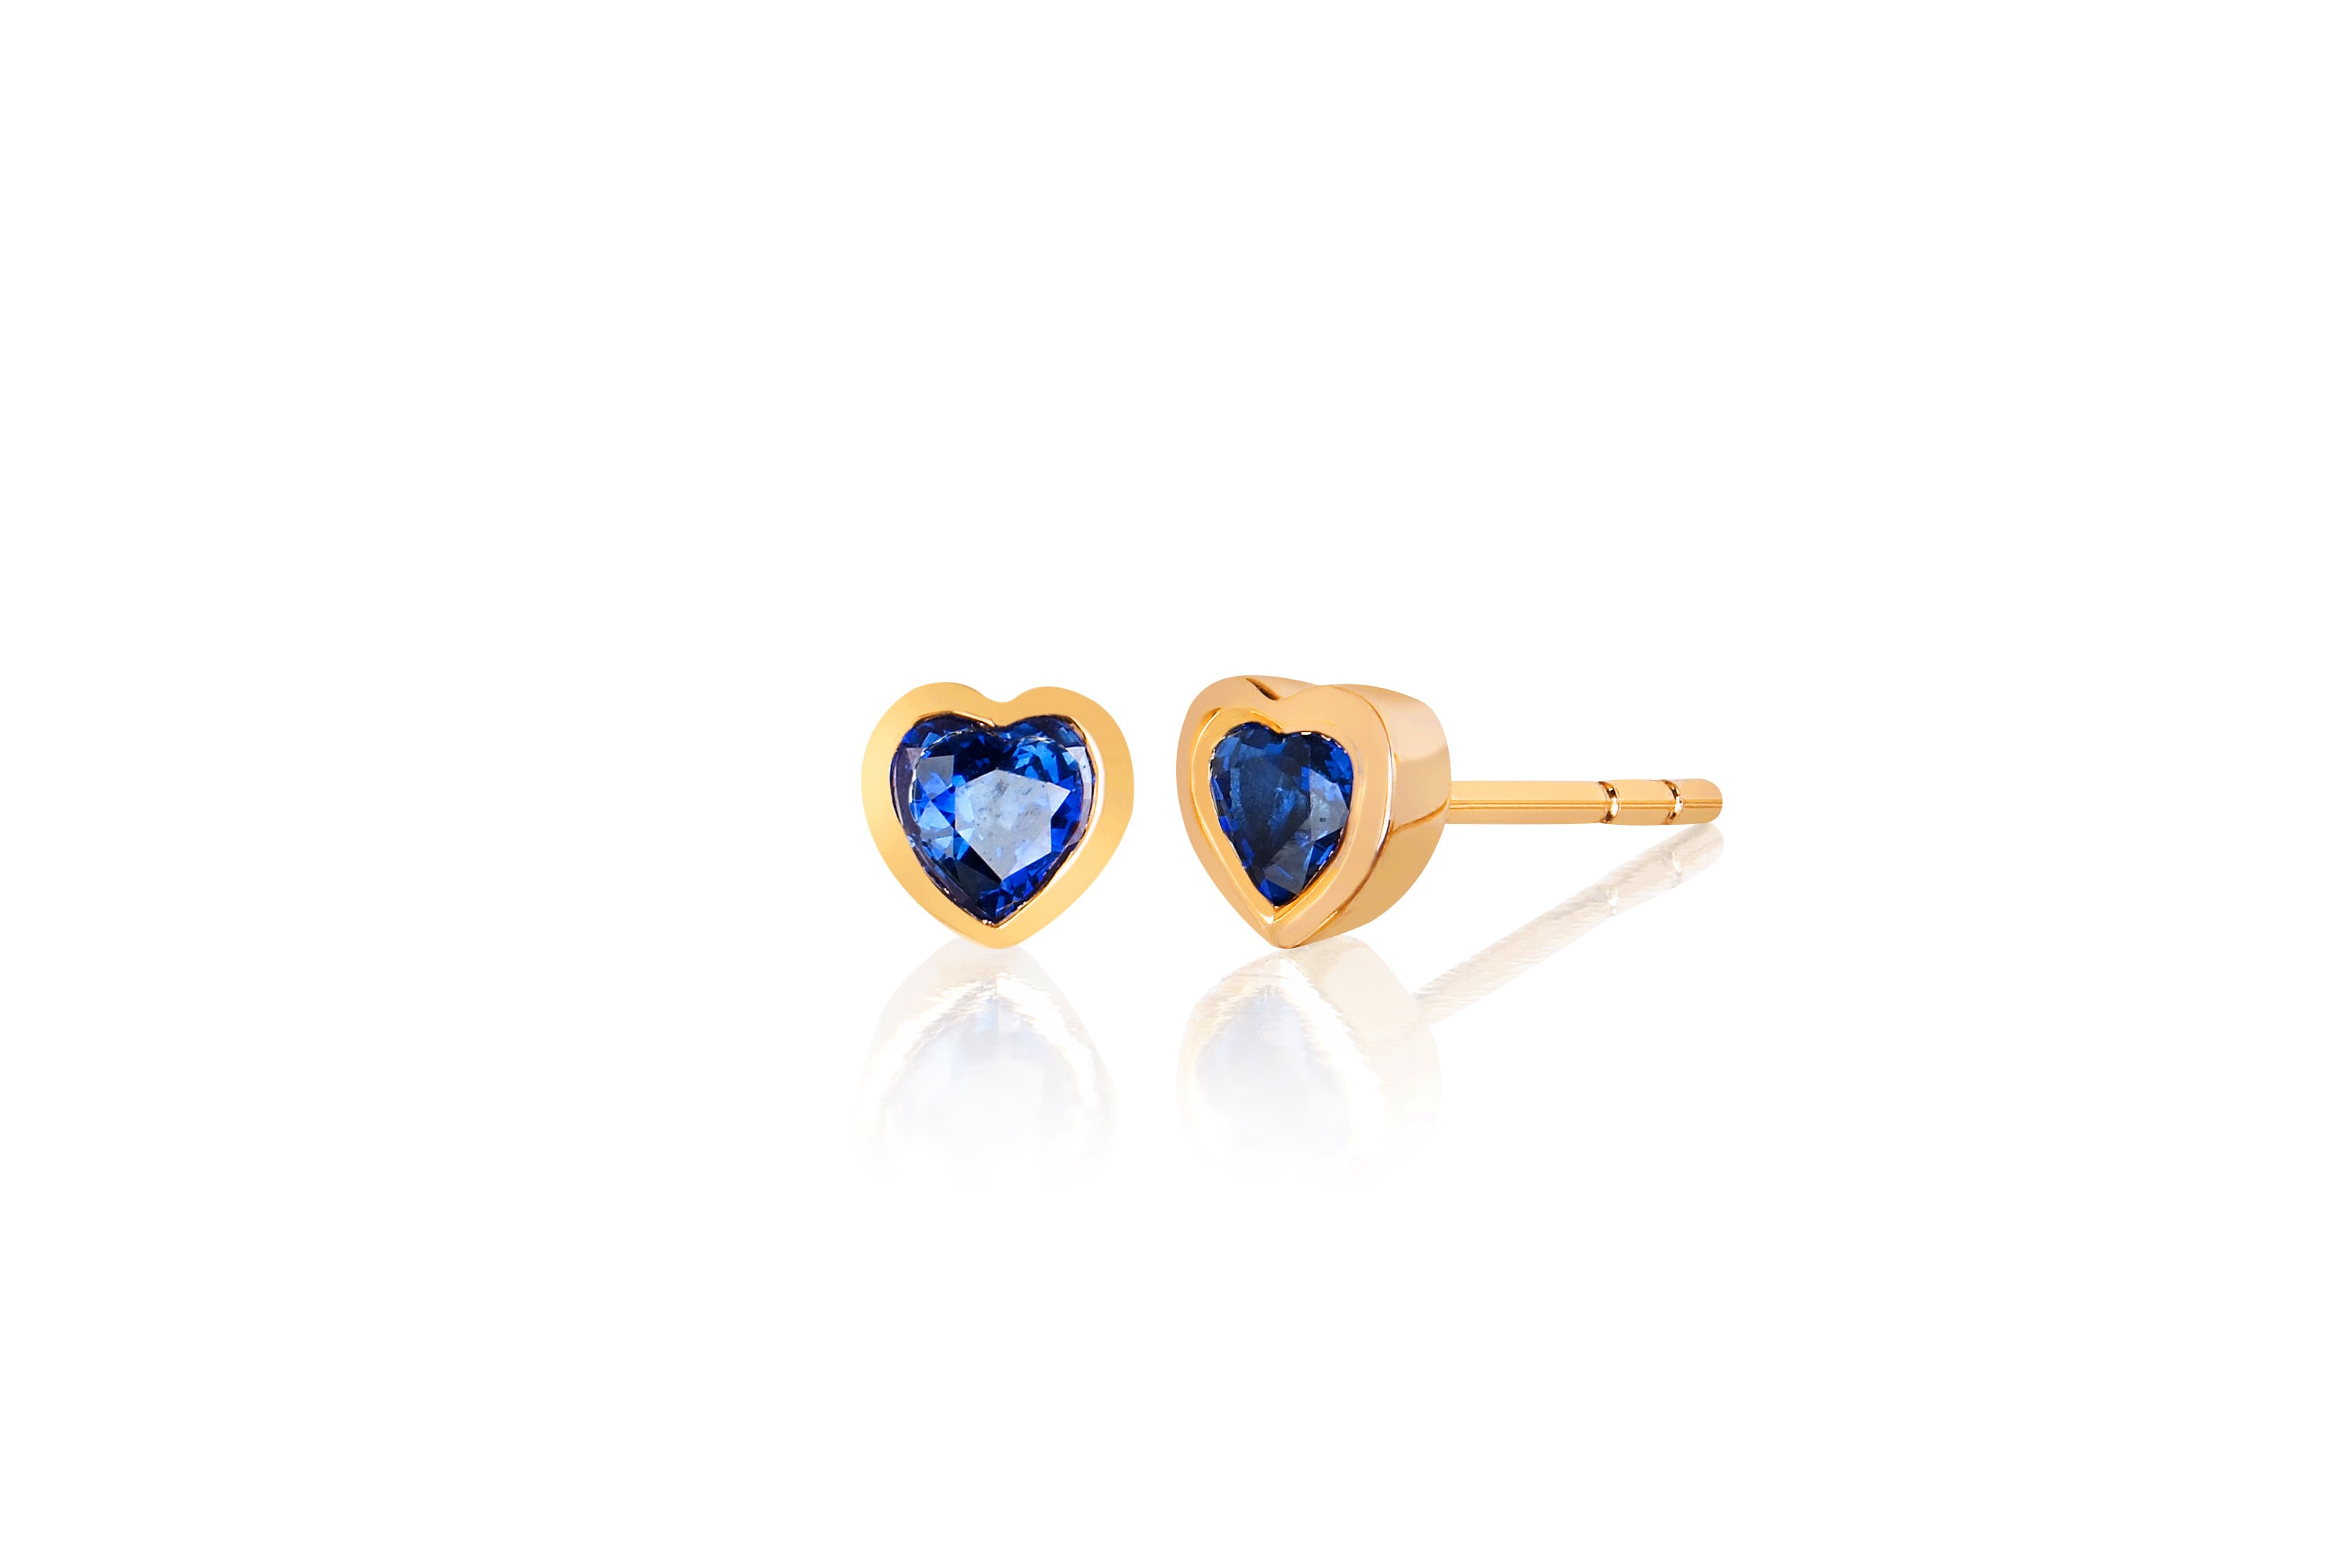 14k (karat) yellow gold heart-shaped stud earrings with blue sapphire in the center and finished with butterfly post backs.